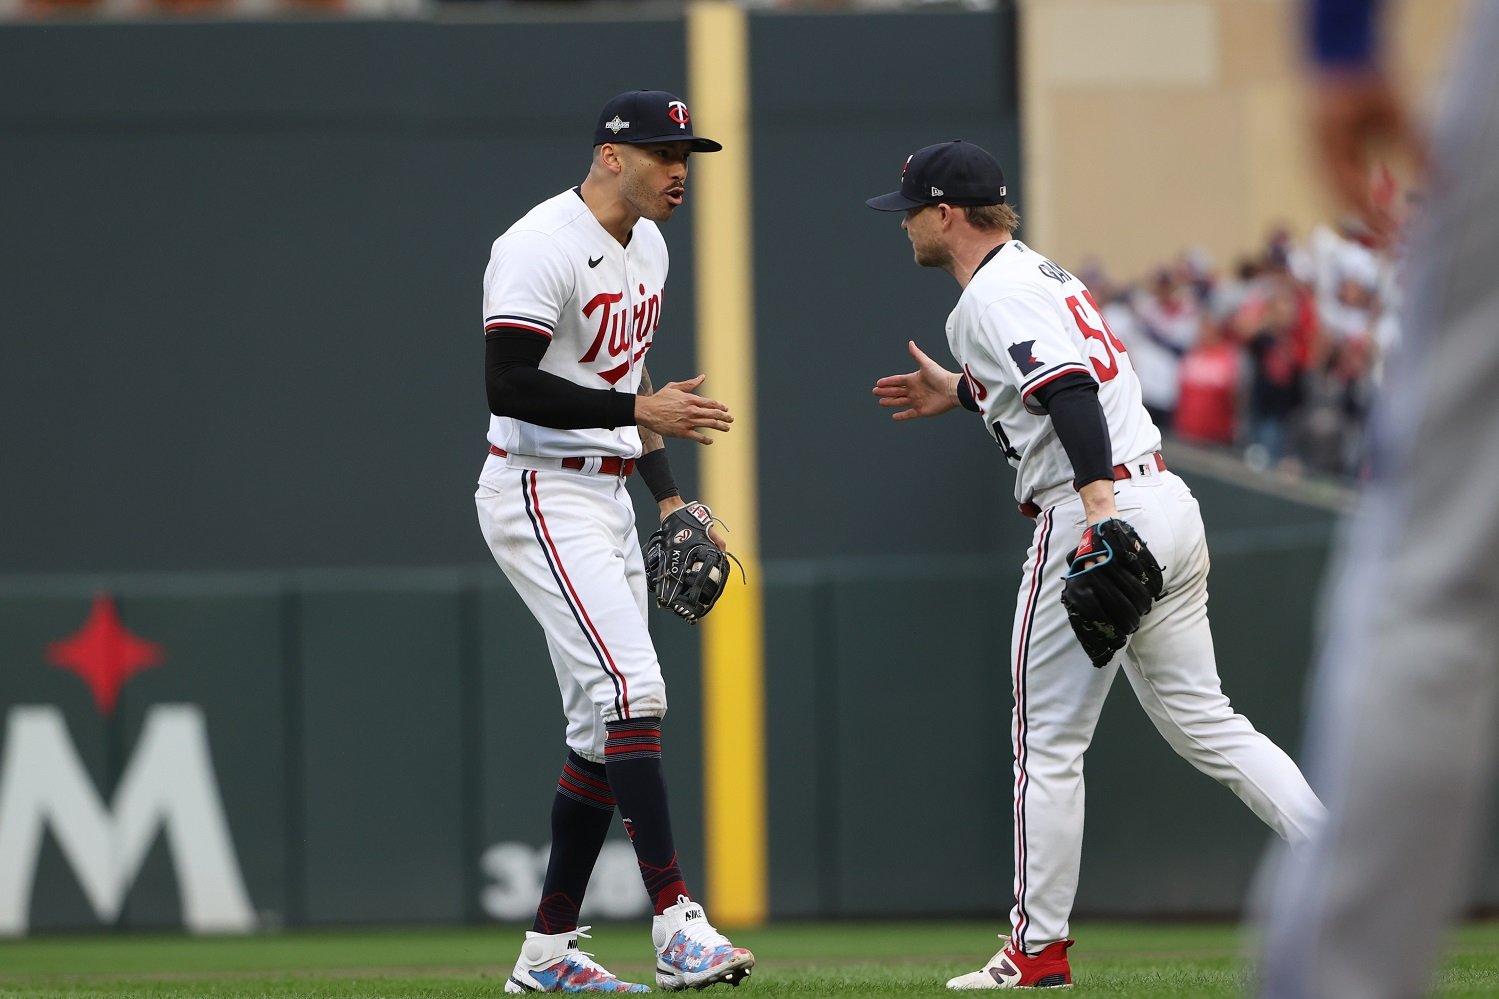 Twins win 2-0, eliminate Blue Jays in MLB wild-card series sweep